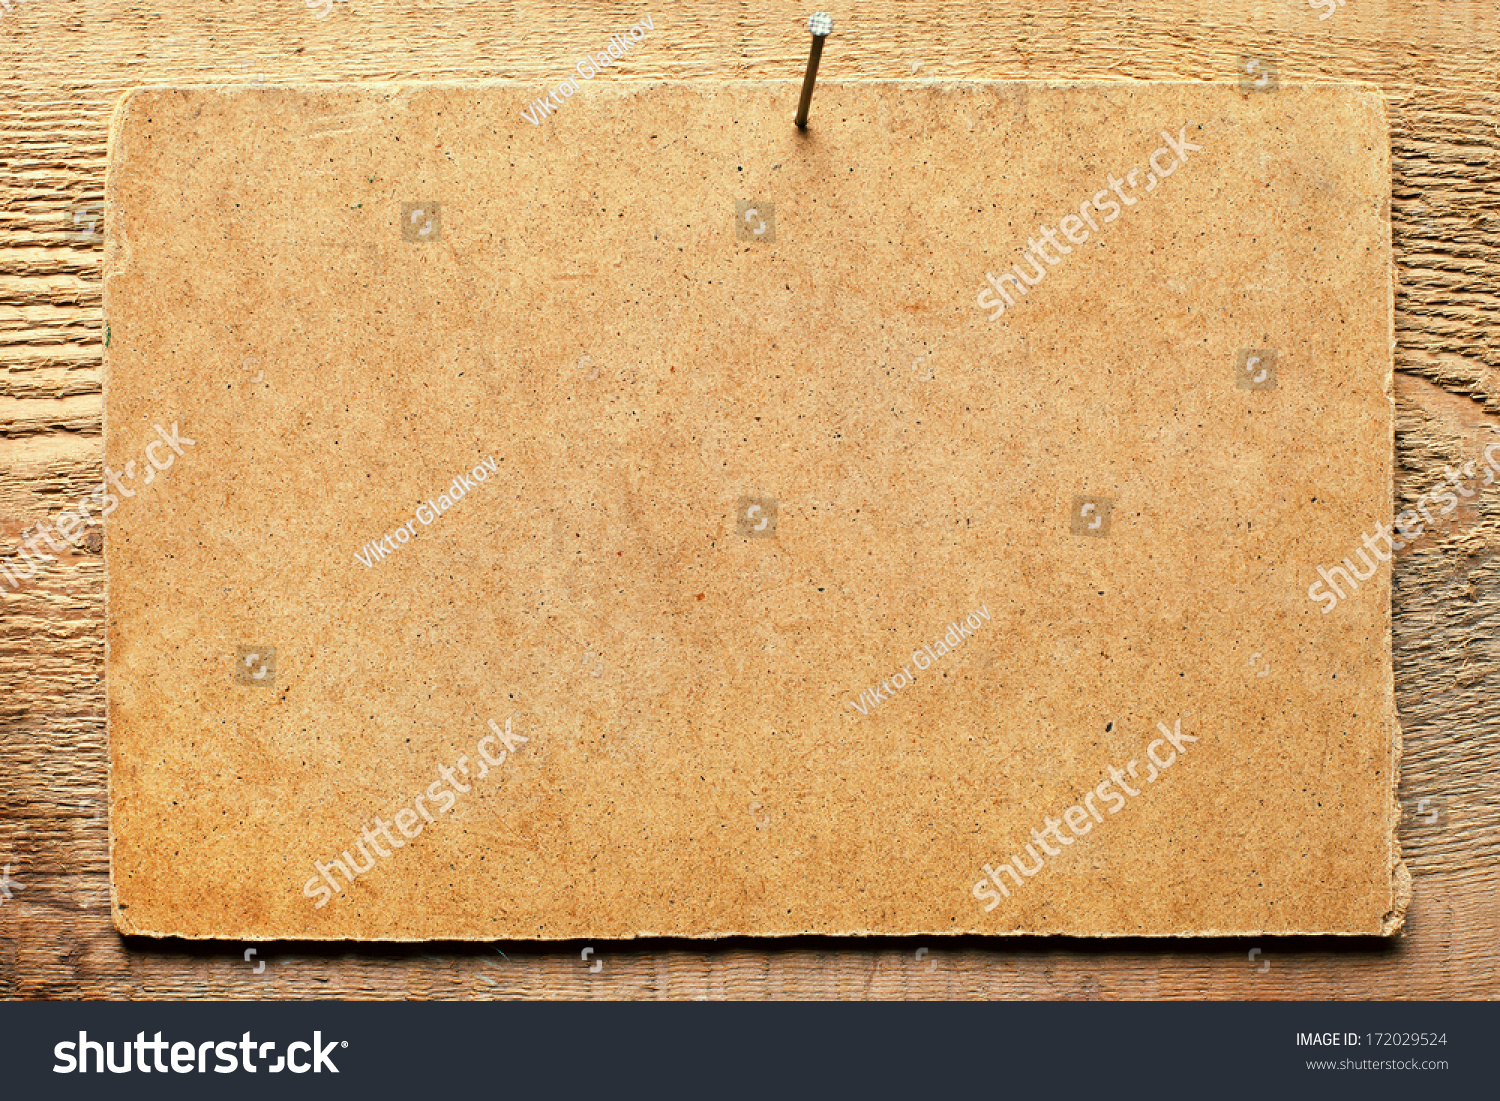 Cardboard nailed to wooden wall #172029524